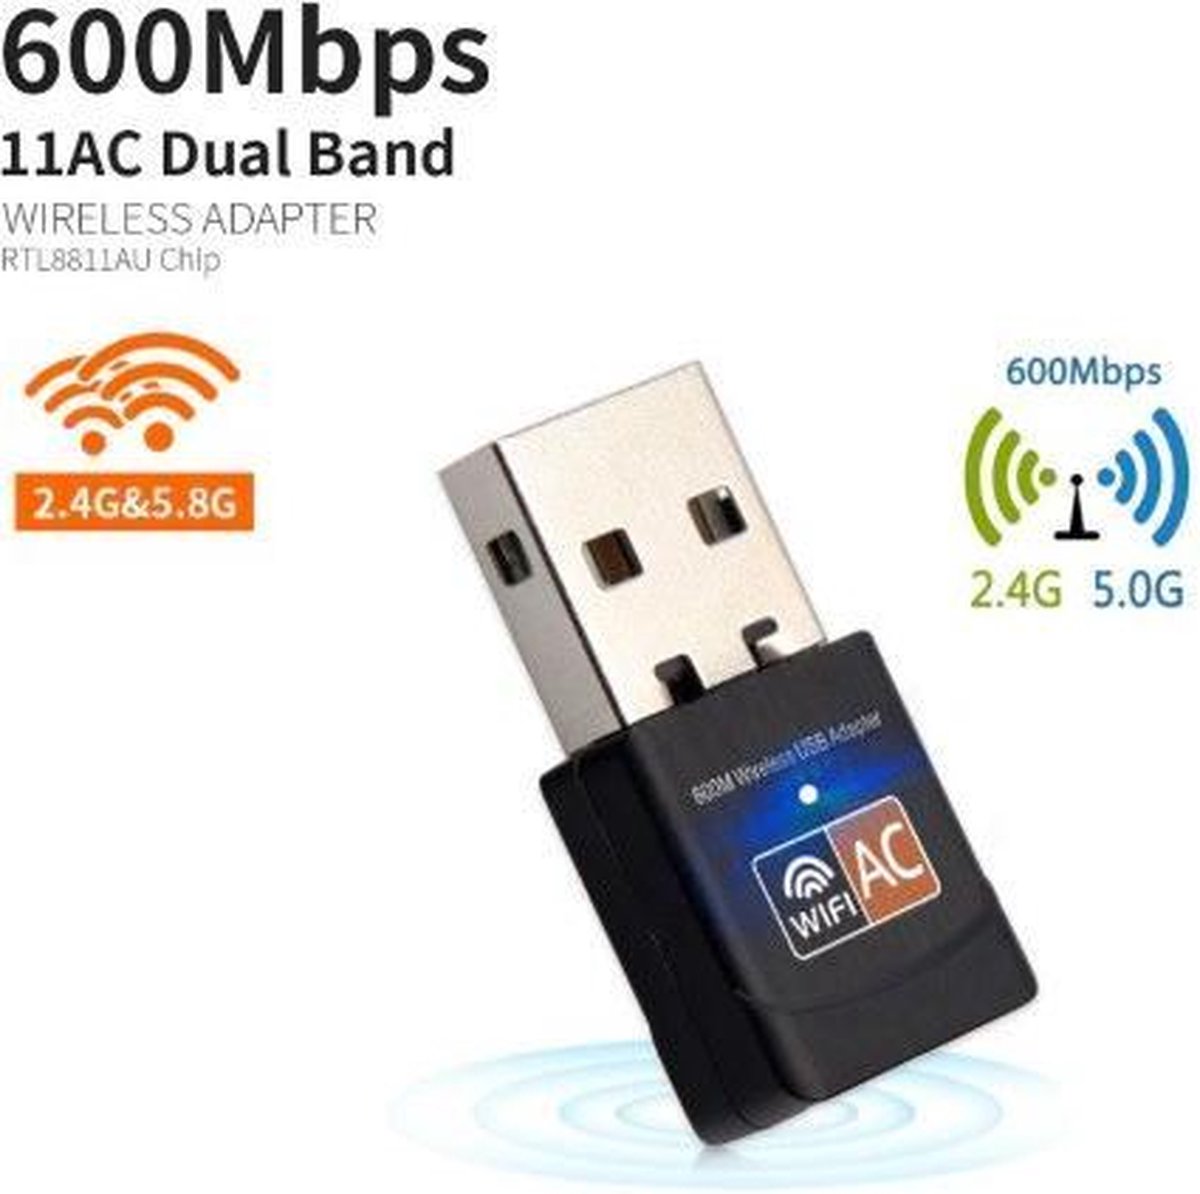 DrPhone W3 USB Draadloze Dual Band 2.4 GHz / 5 GHz WiFi-adapter (600 Mbps Ultra FAST) Superspeed Mini WiFi-Dongle voor o.a Desktop /Laptop /PC Windows 10/8/7 MAC OS / Kali Linux/ ODROID 600mbps